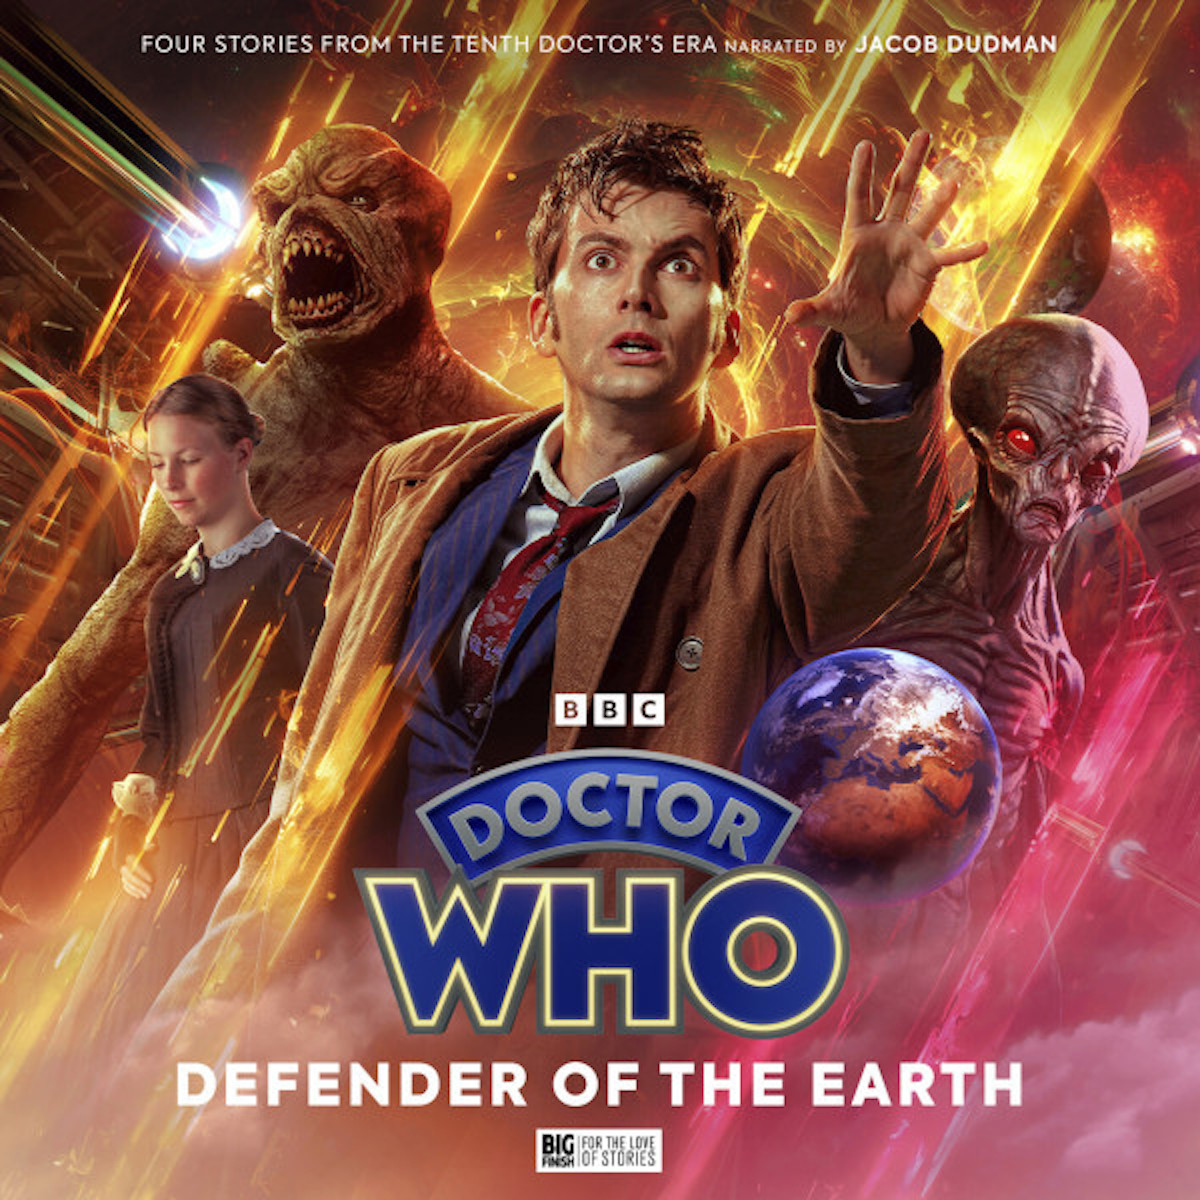 The Doctor Chronicles: The Tenth Doctor: Defender of the Earth